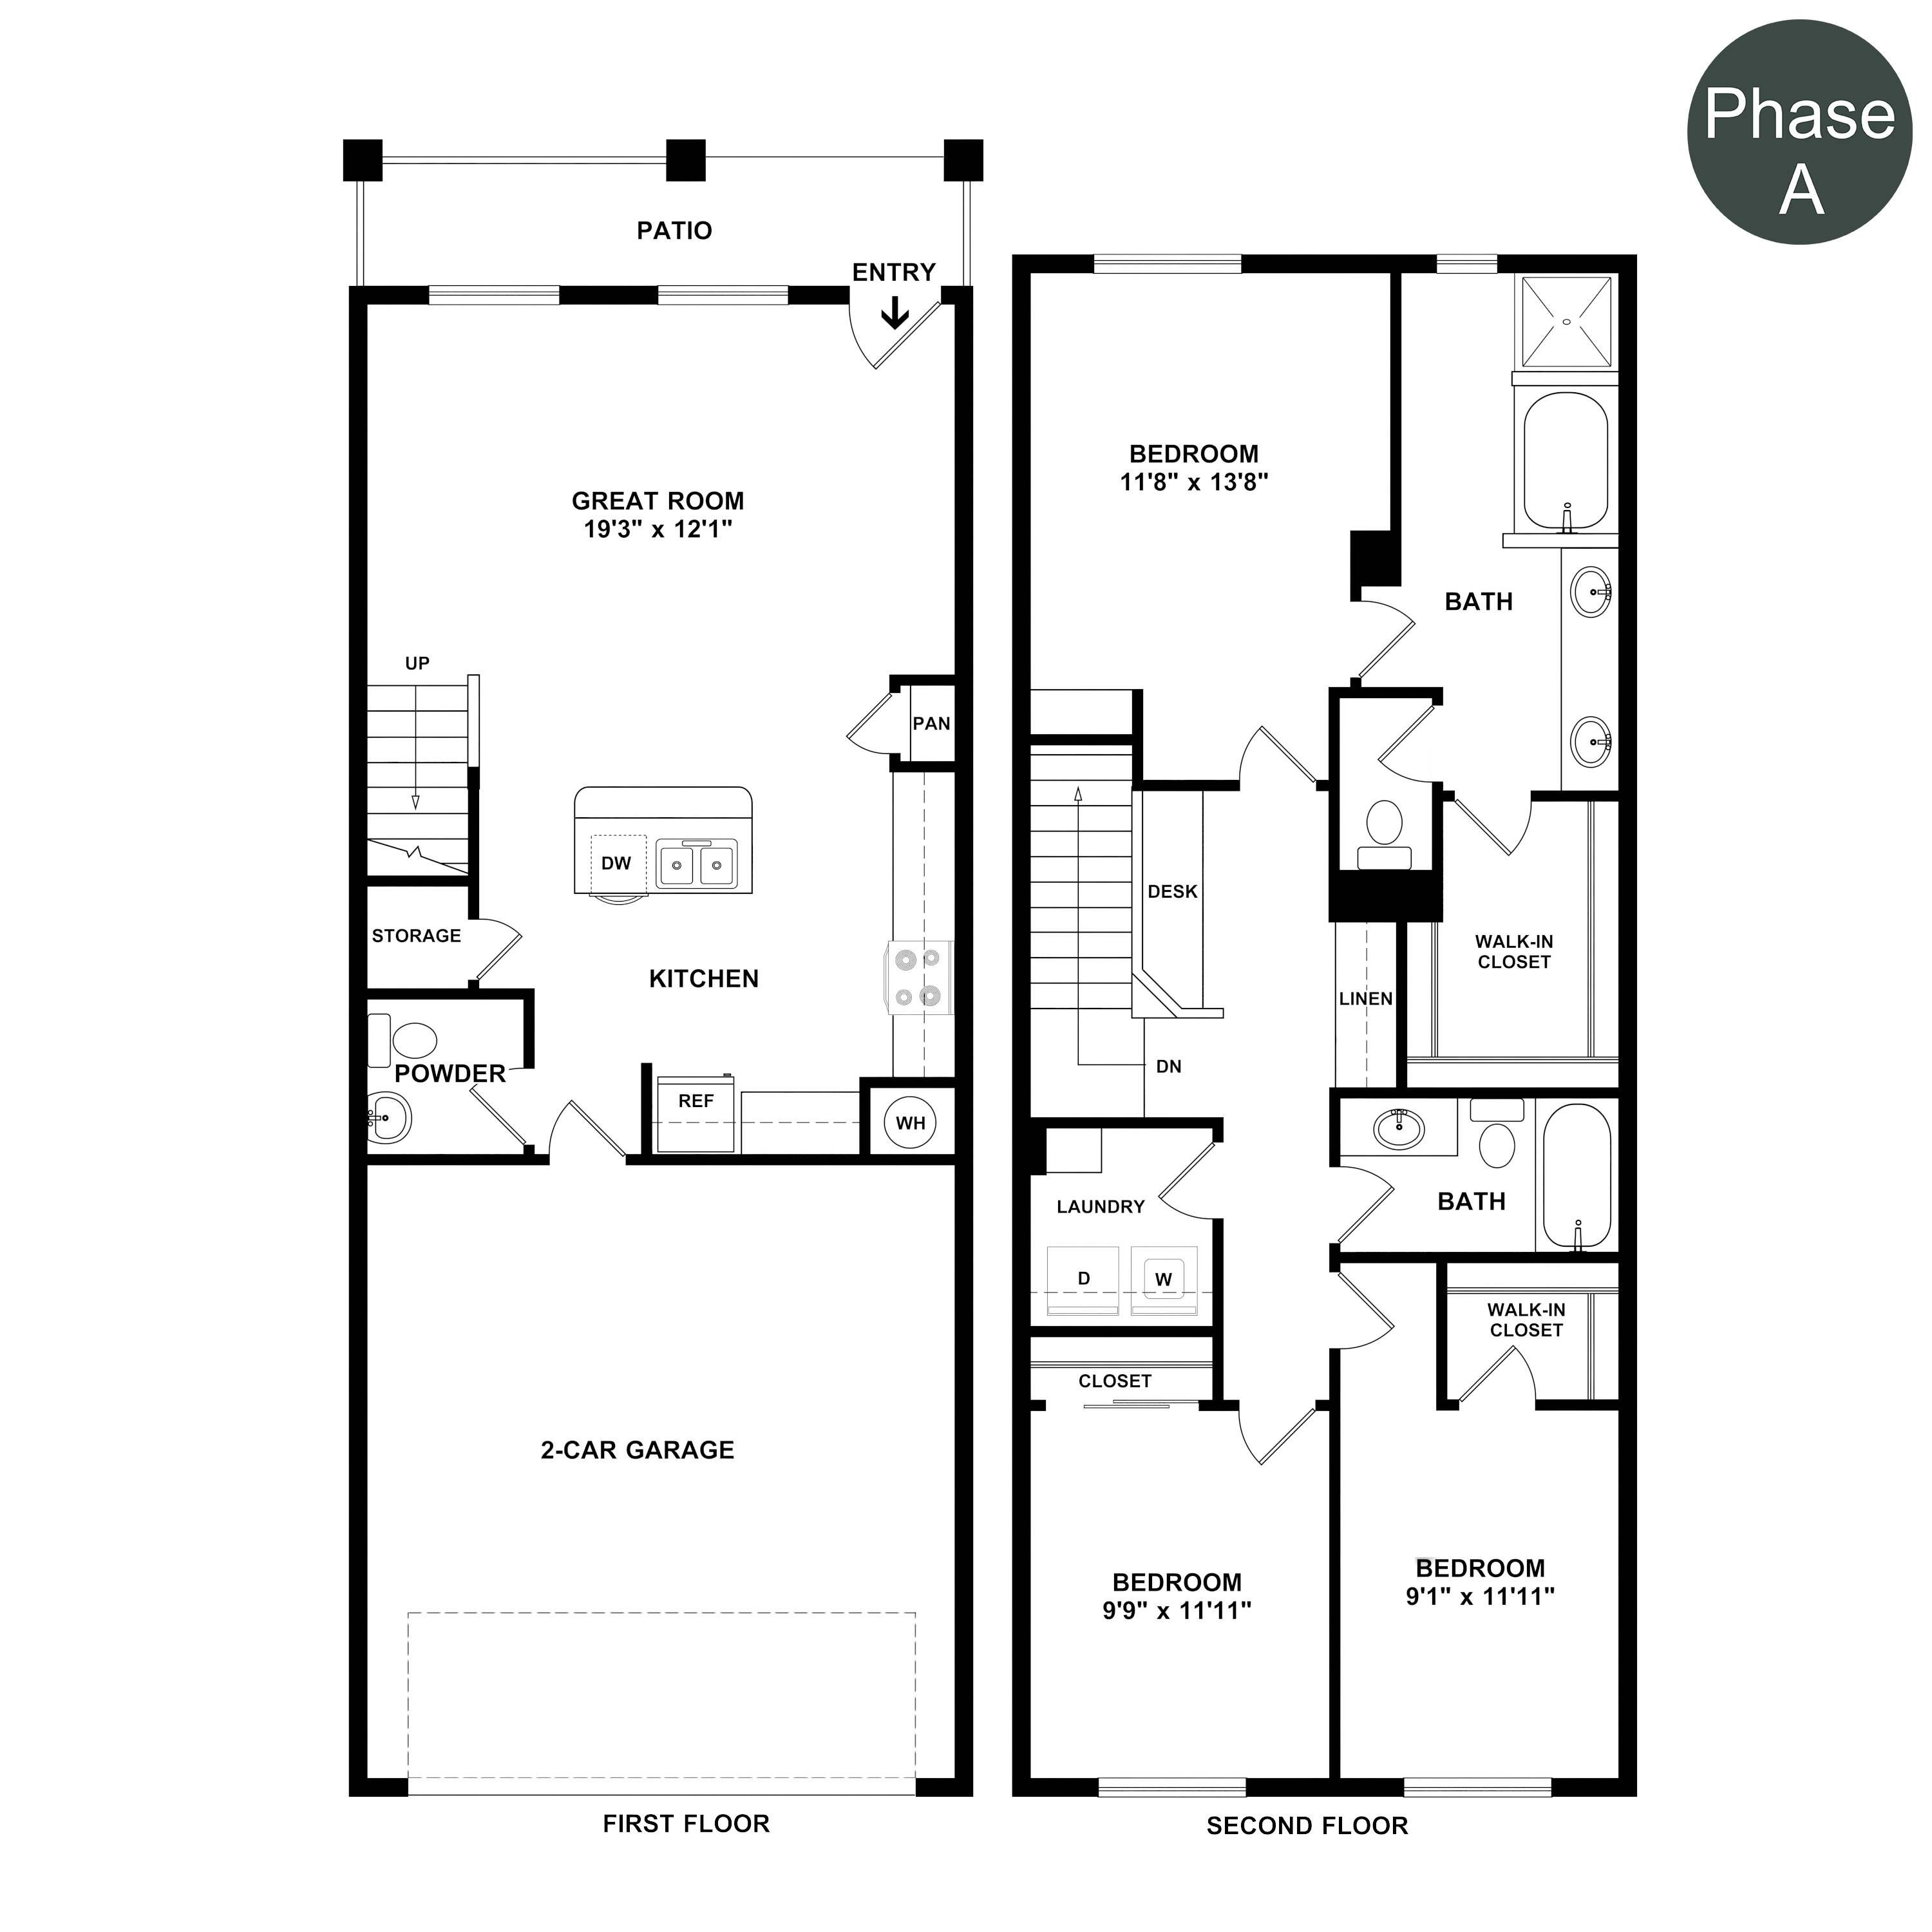 The Townhomes Plan 3A